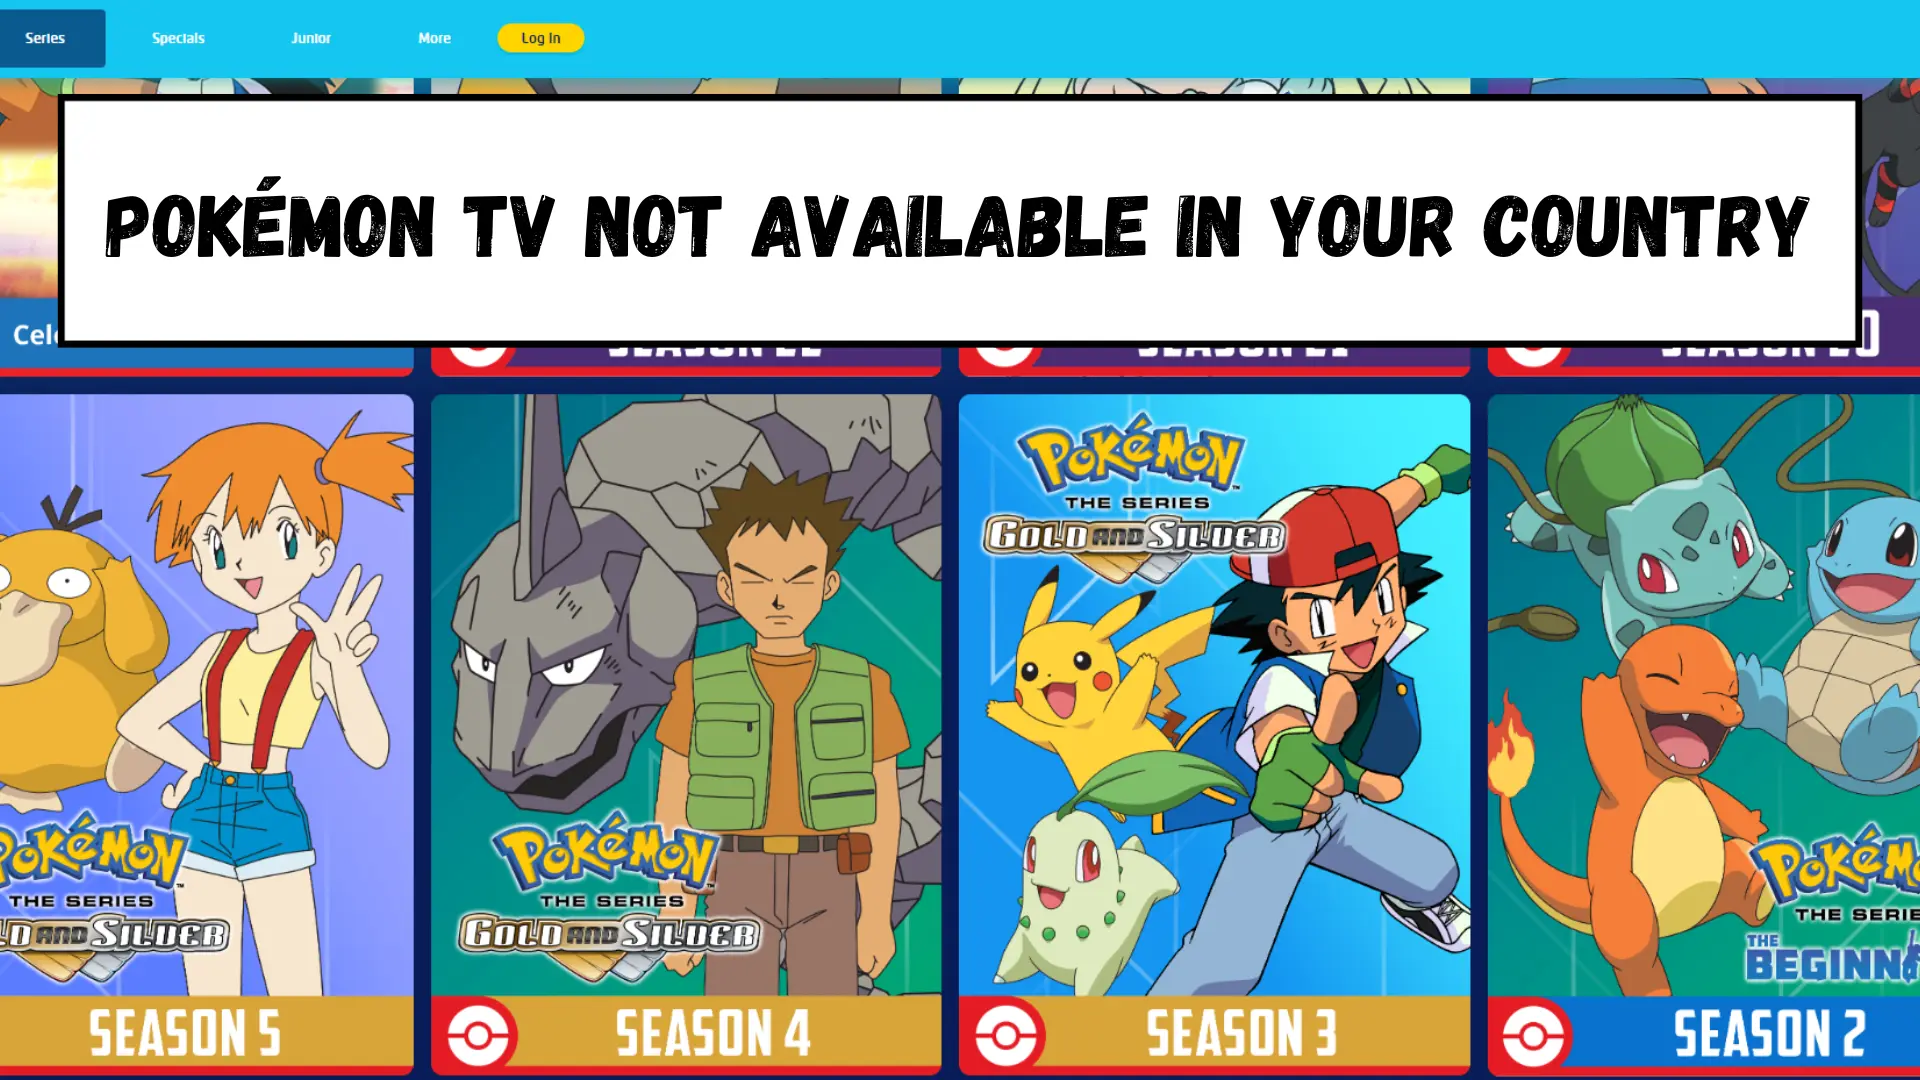 Pokemon TV Not Available in Your Country